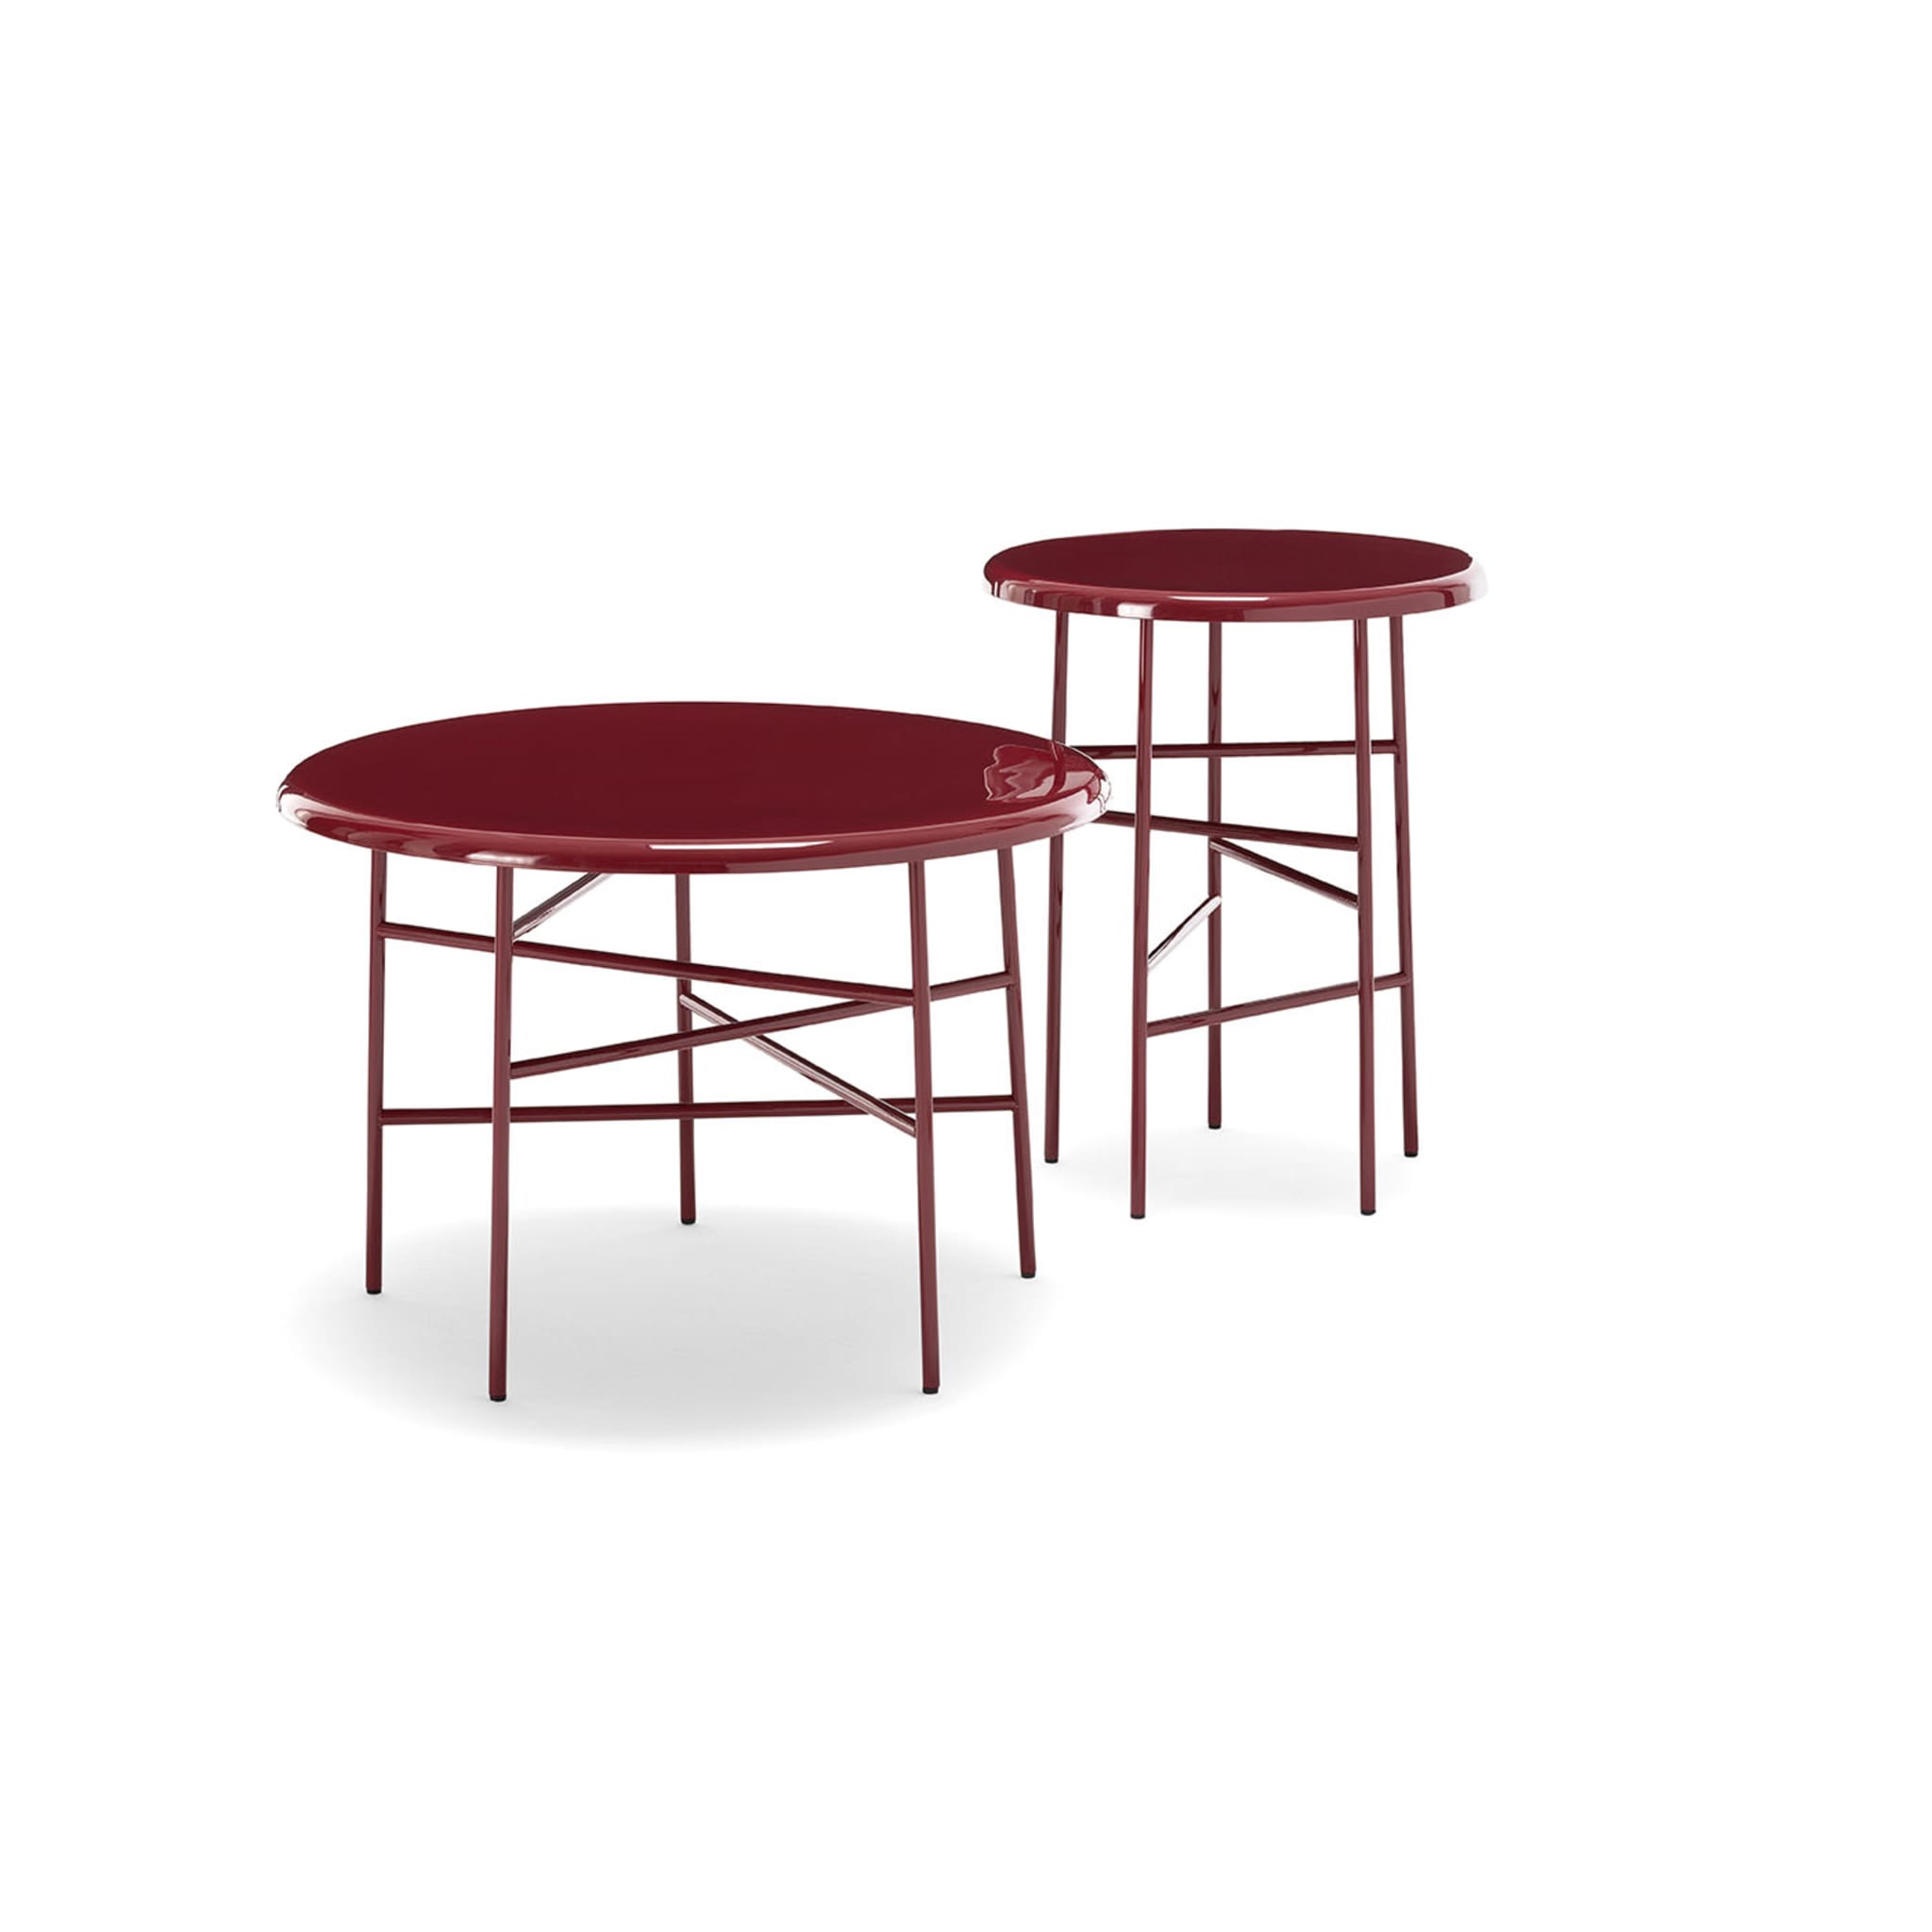 10th Star Red Glossy Lacquered Side Table 40 - Alternative view 1